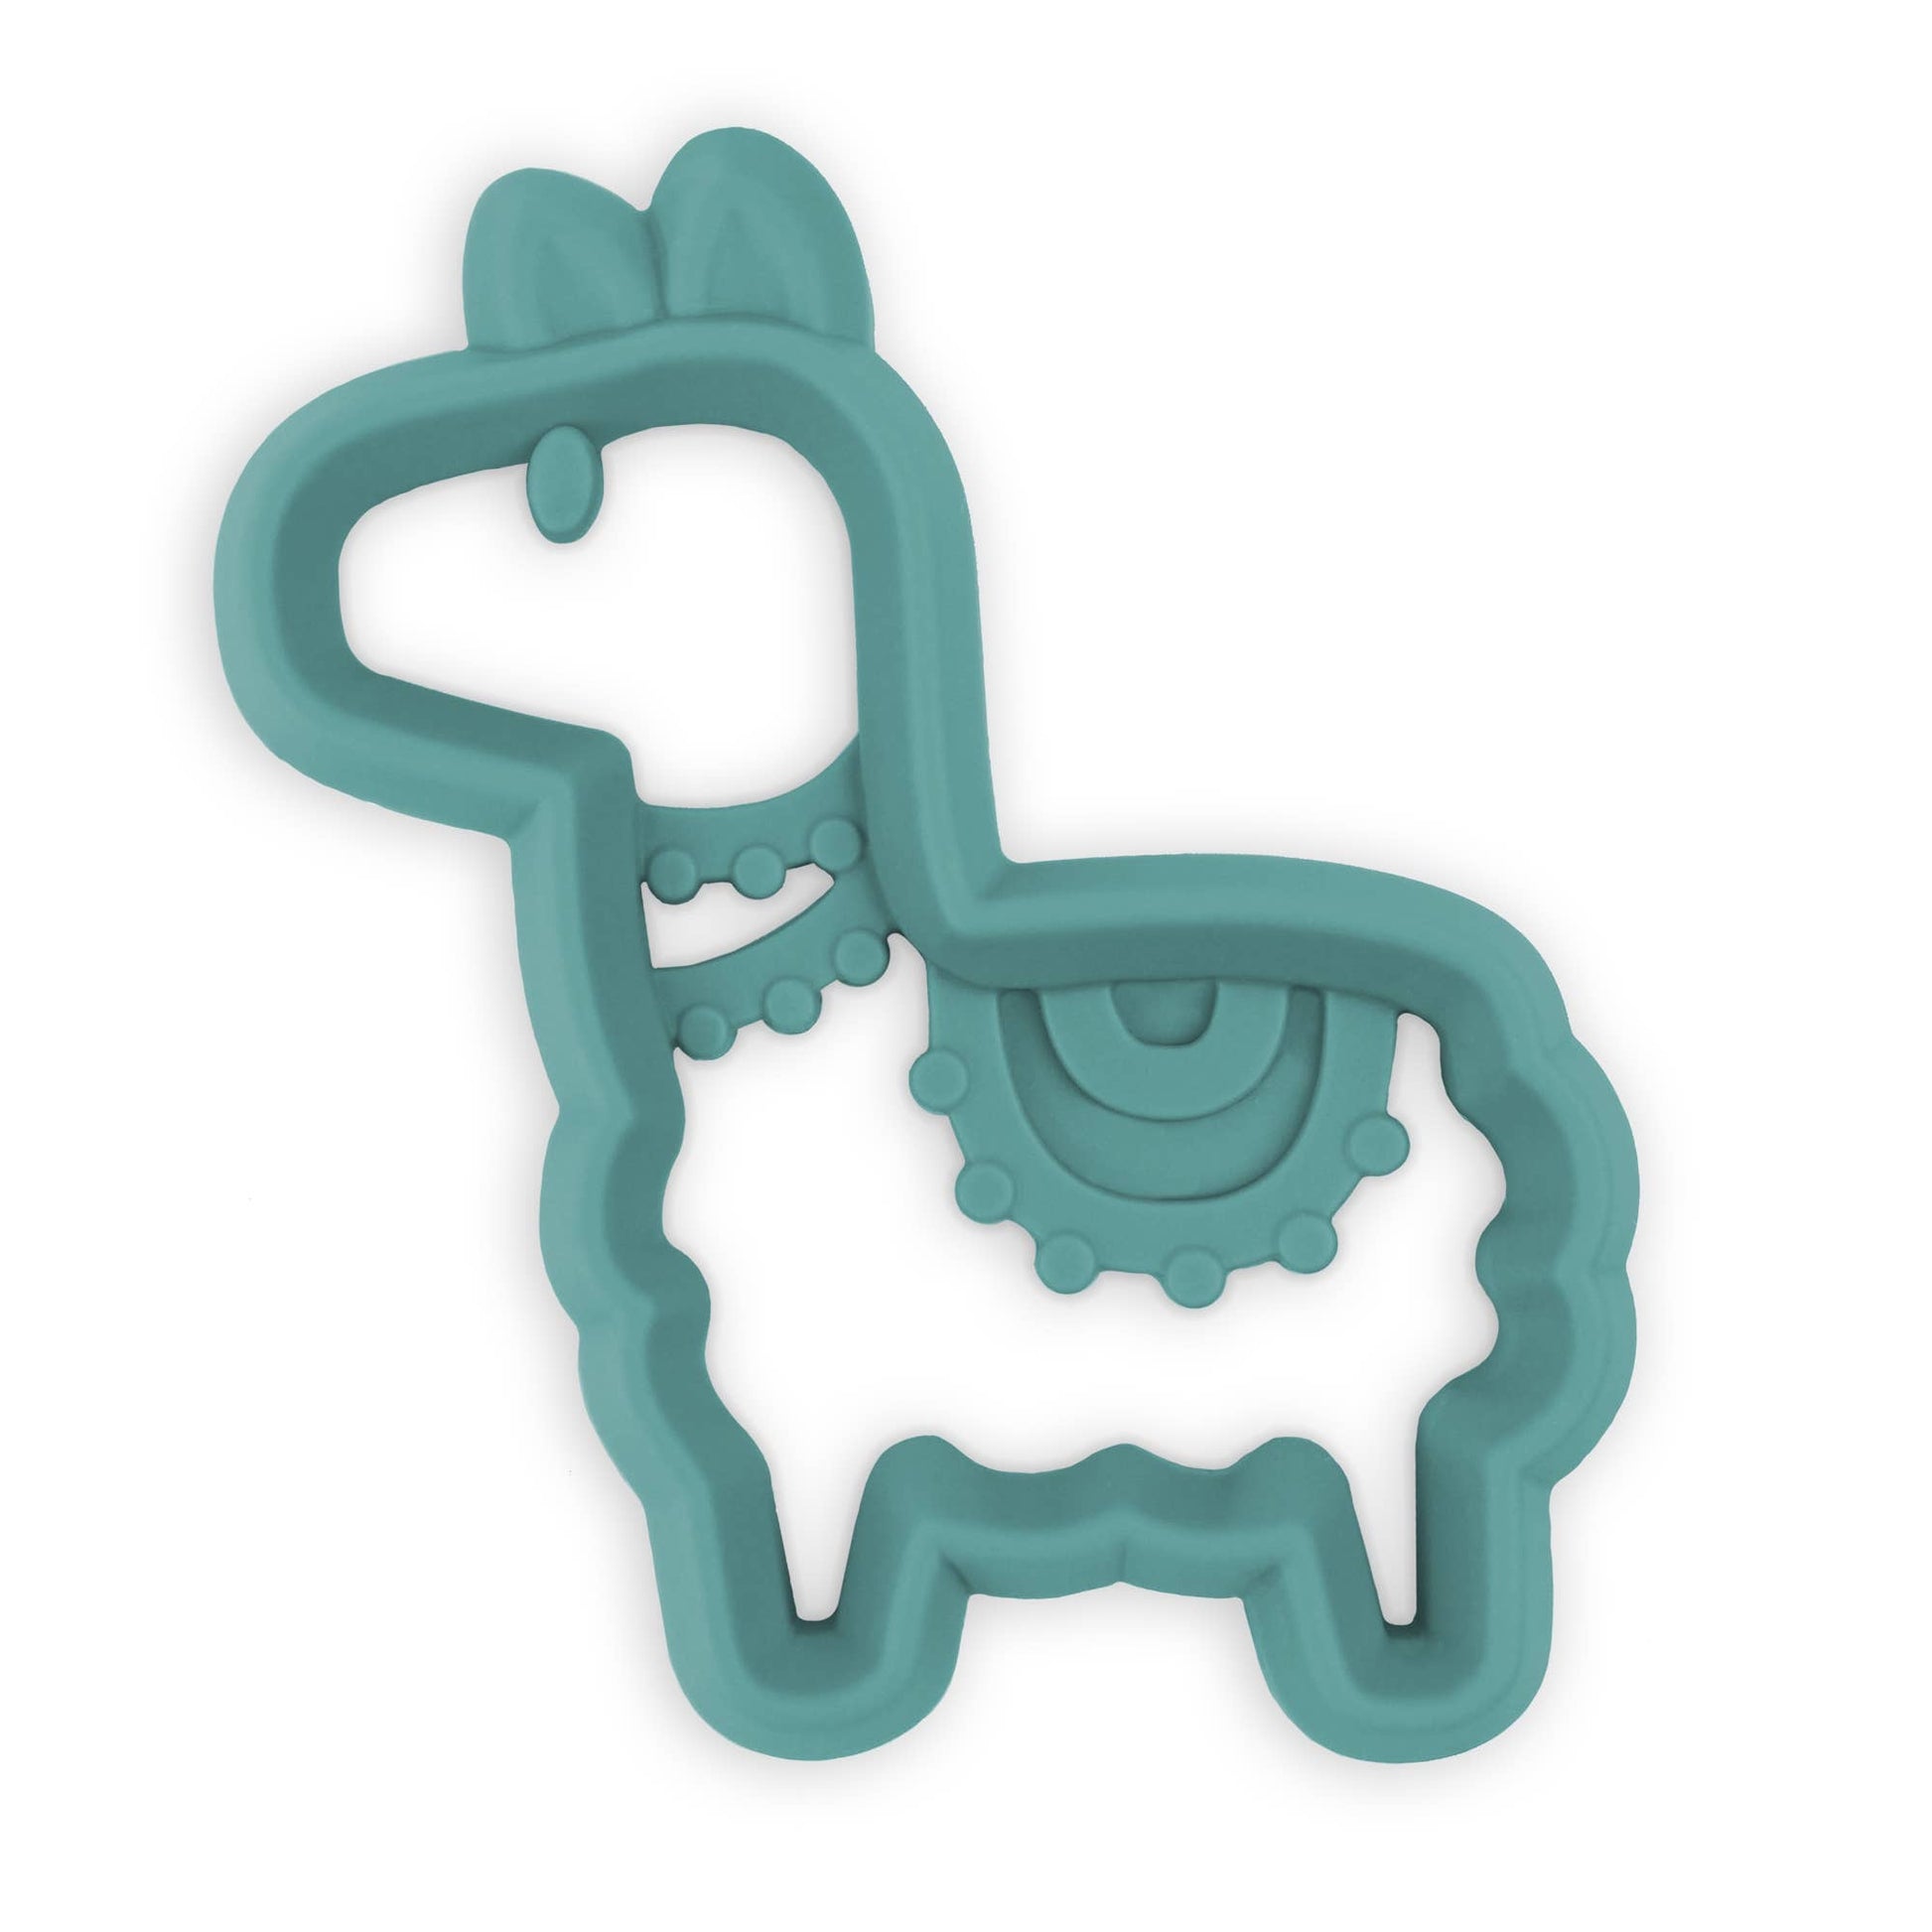 Blue Party Llama - Sore gums are no match for the Itzy Ritzy Silicone Teether! Itzy Ritzy teethers are safe on baby’s gums, and the open design makes them easy for small hands to grasp.  These teethers are made of non-toxic food grade silicone and have texture on one side to massage sore gums and provide relief to emerging teeth. The texture also helps your baby discover and explore new senses, so go ahead and chew on this